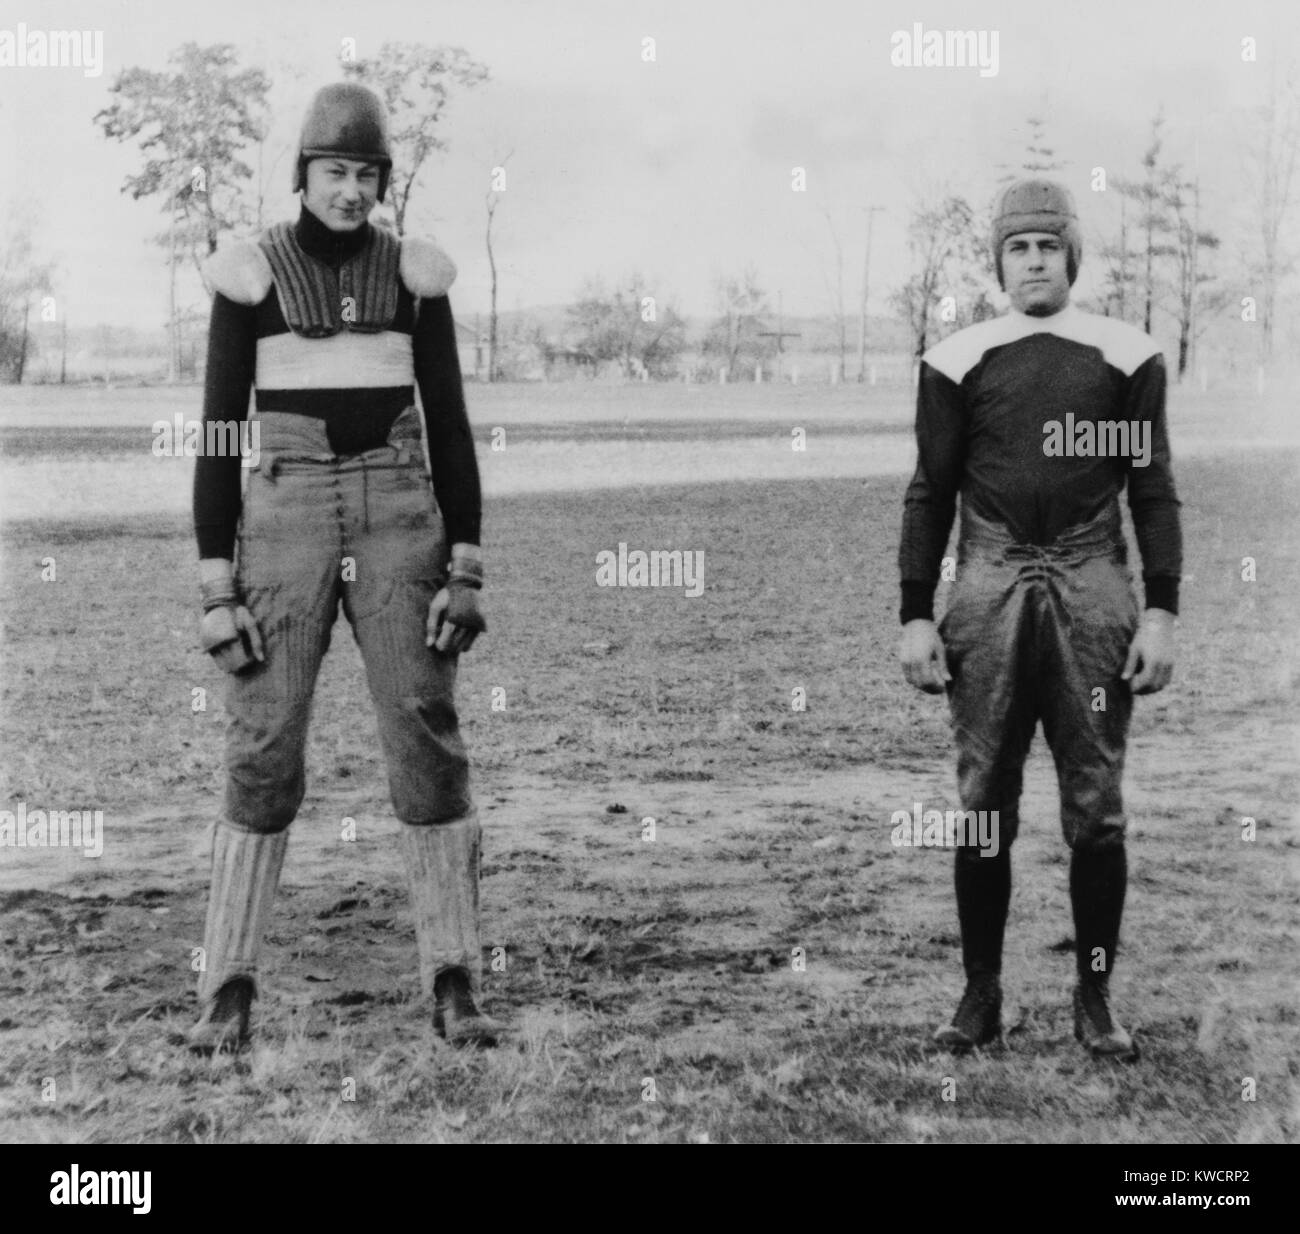 Notre Dame University football players wearing old and new football uniforms. At left is a football suit of the 1880's with external padding. At right is a 'modern' uniform with shoulder pads worn under the jersey. South Bend, Indiana. Ca. 1930. - (BSLOC_2015_1_220) Stock Photo